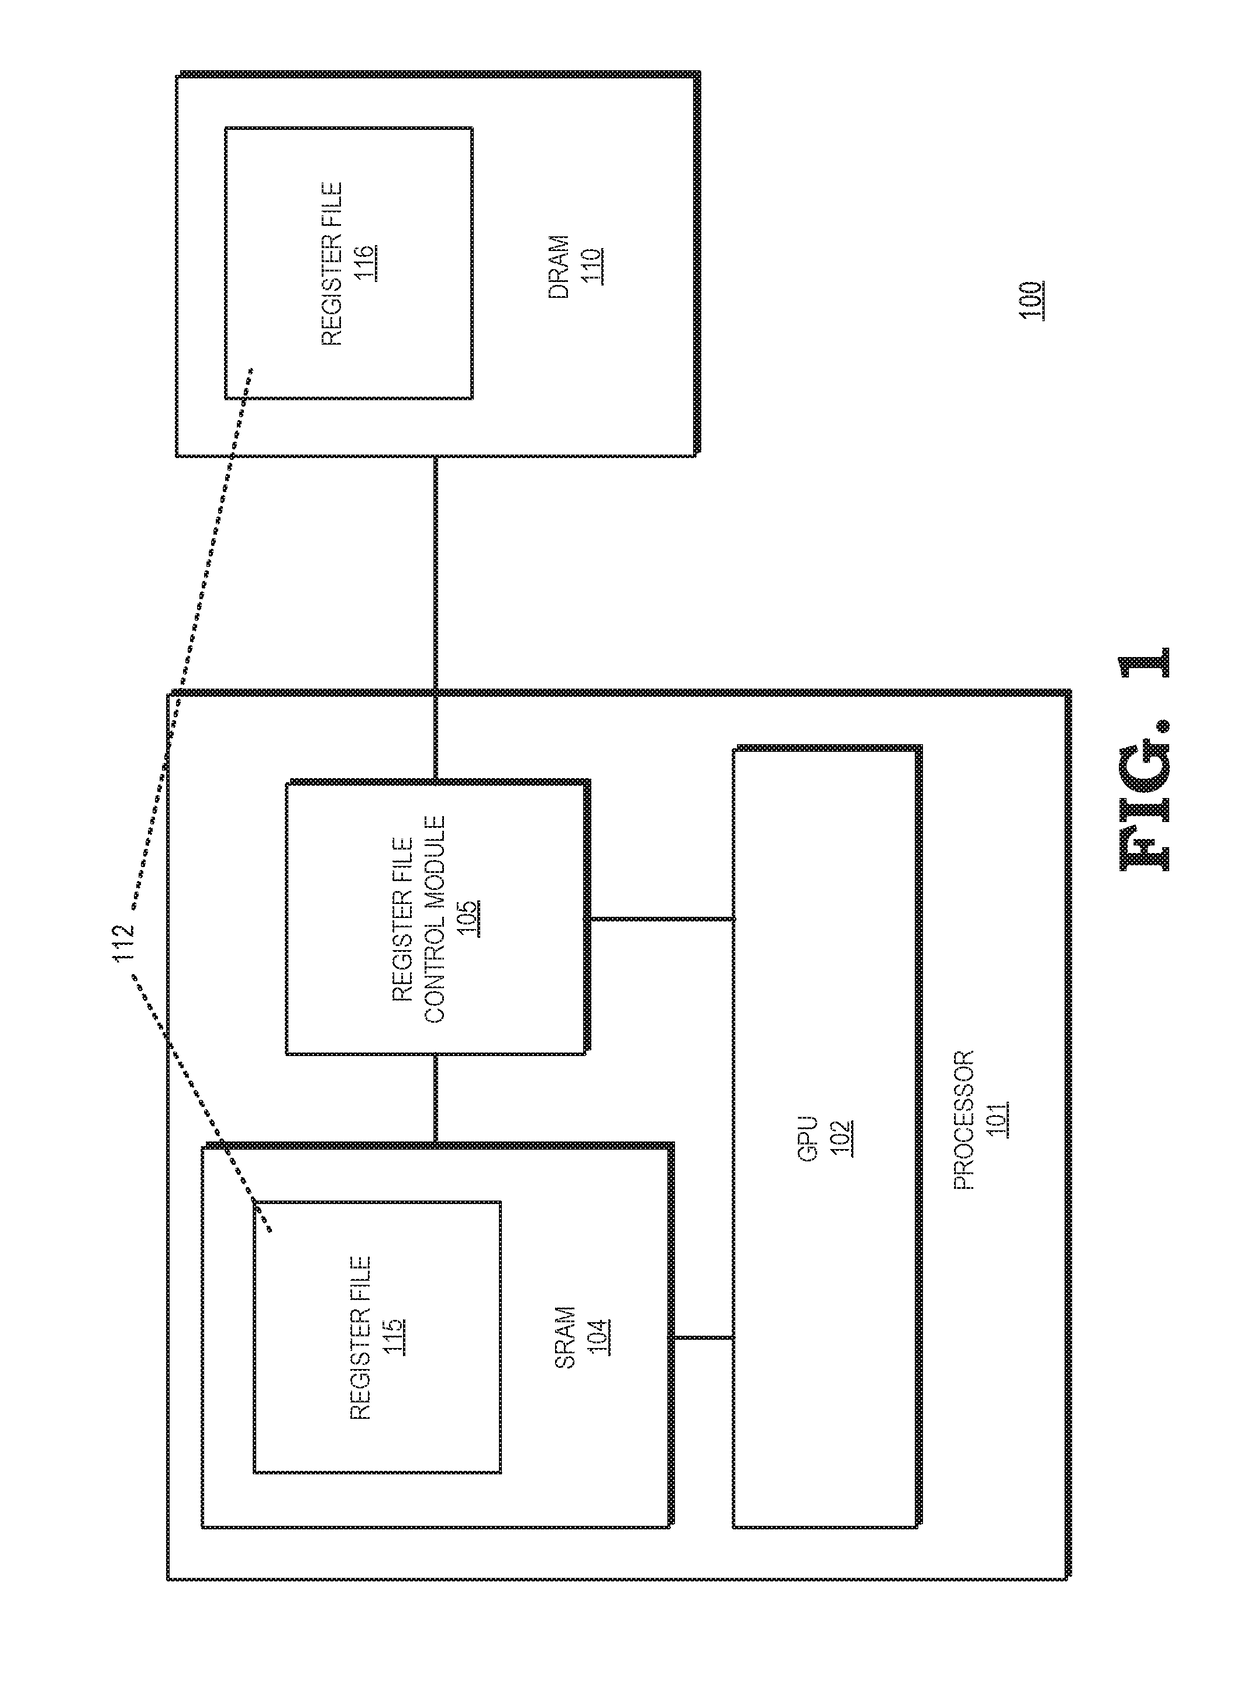 Hierarchical register file at a graphics processing unit